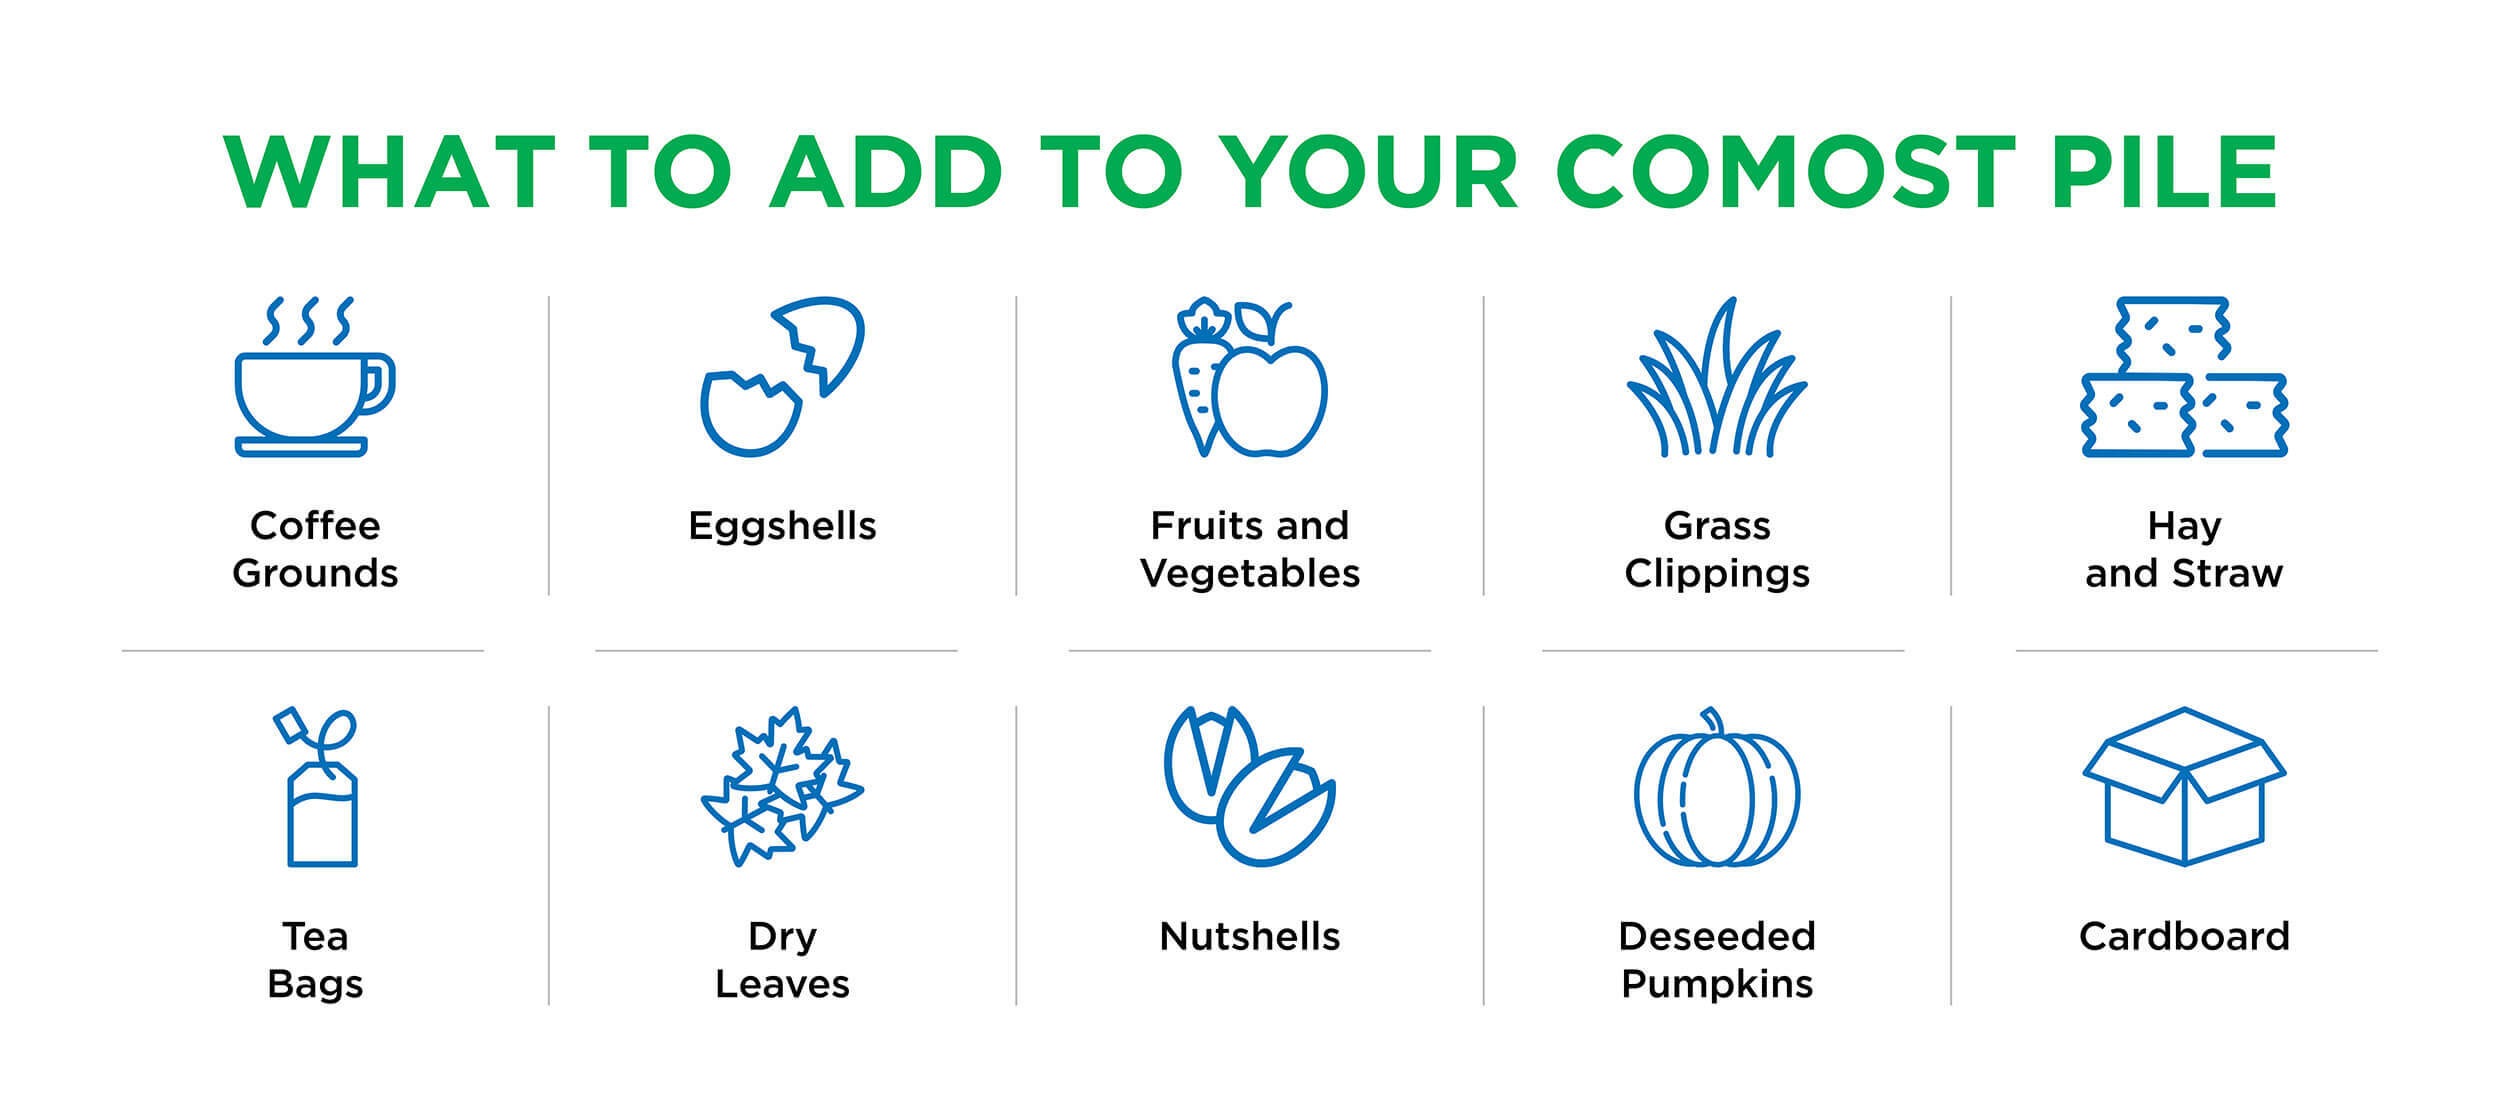 An infographic showing what items you can add to a compost pile.